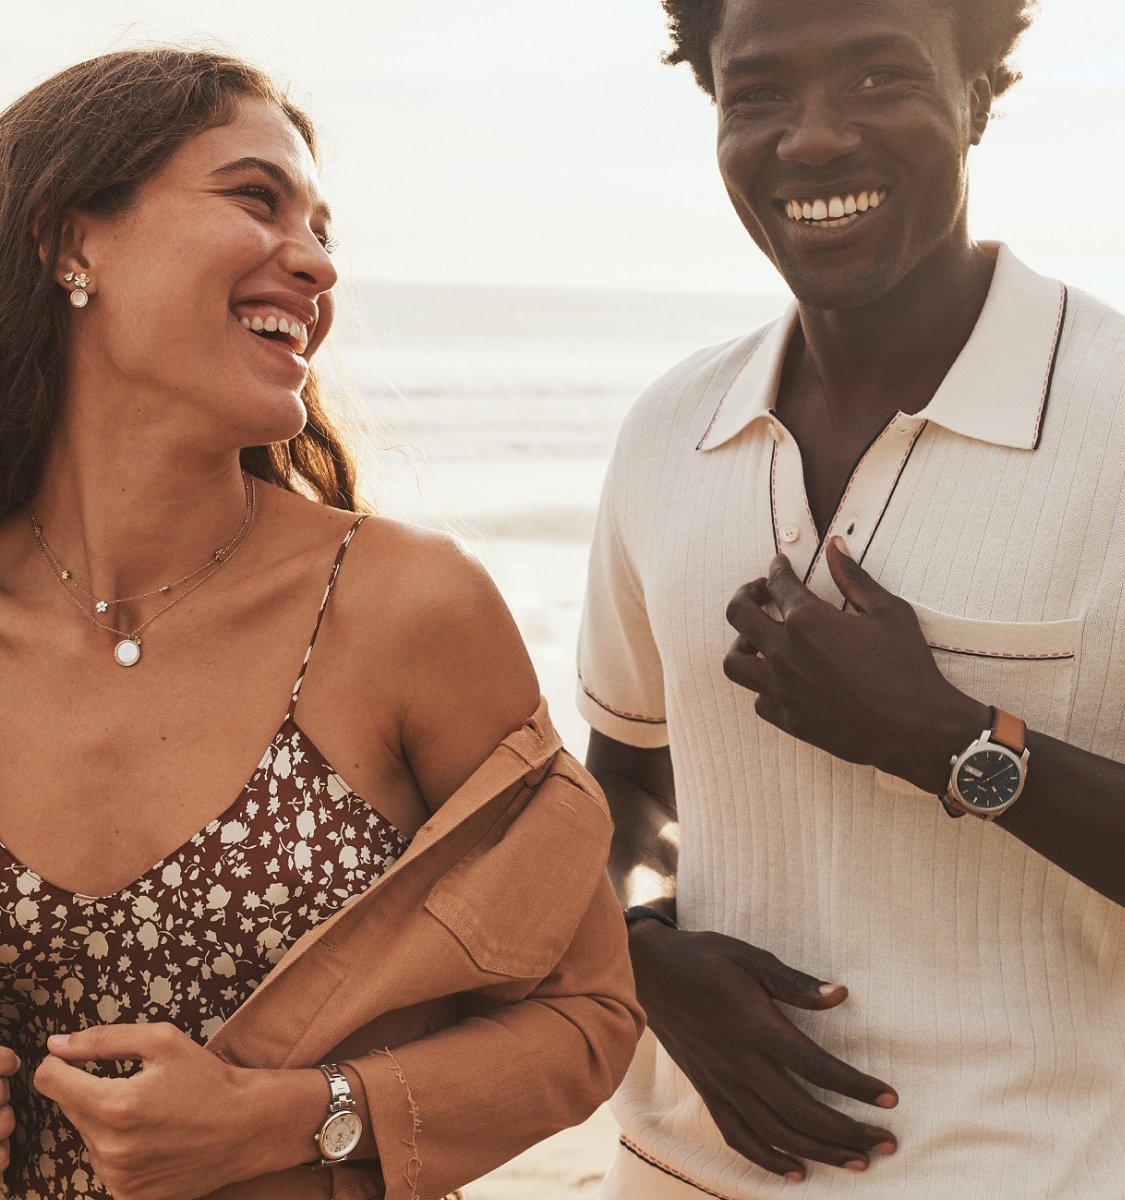 Woman and man with Fossil watches and accessories